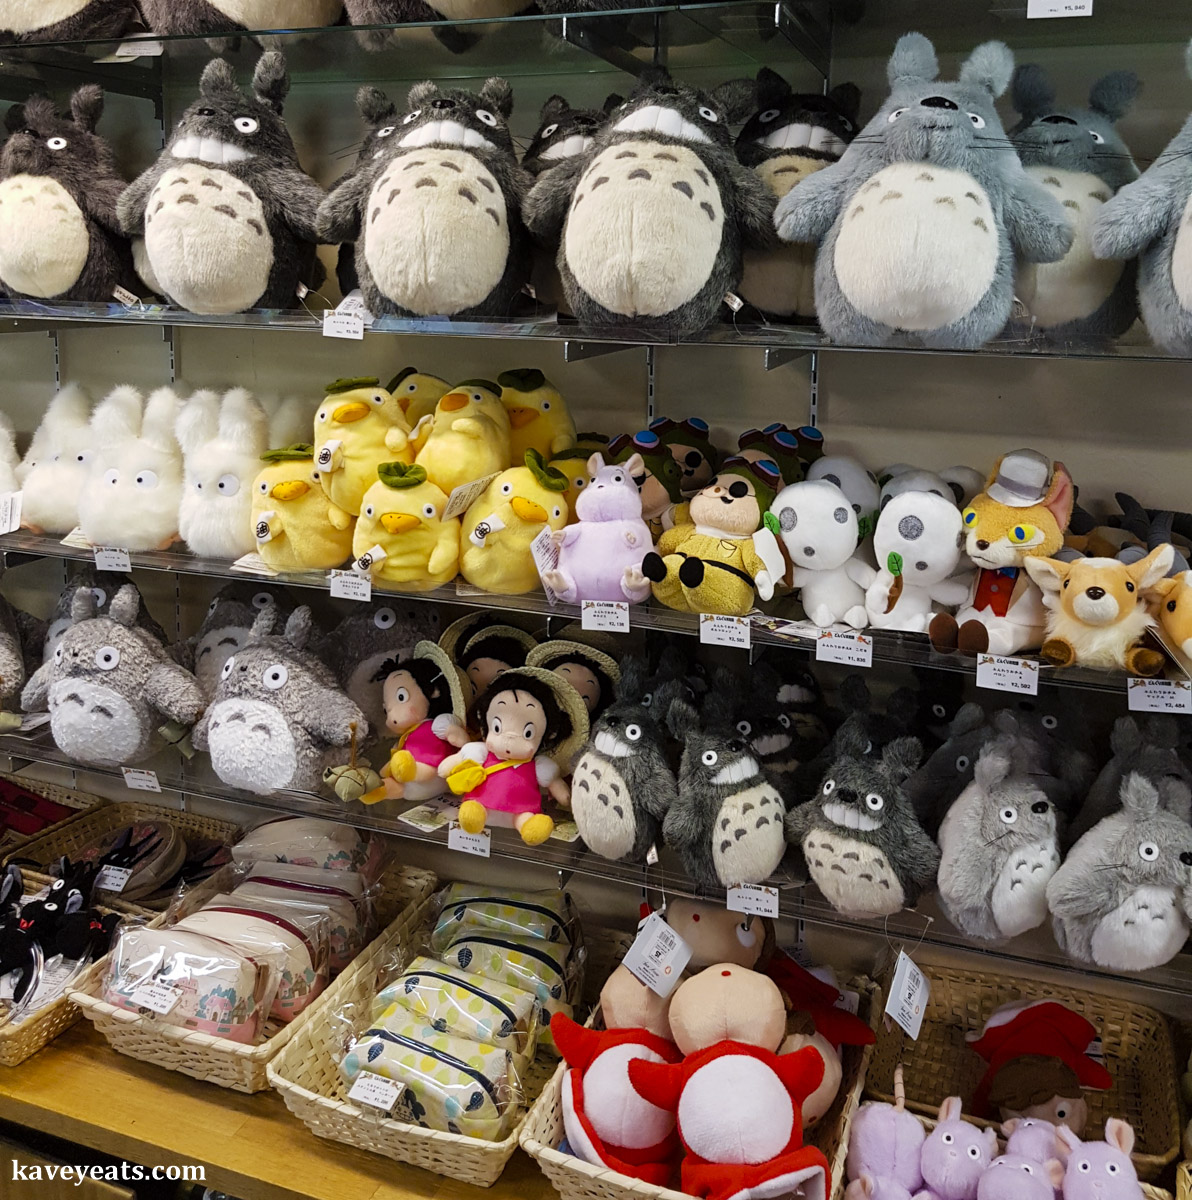 Authentic Japanese Souvenirs - Top 25 Items and Shops to Find Them